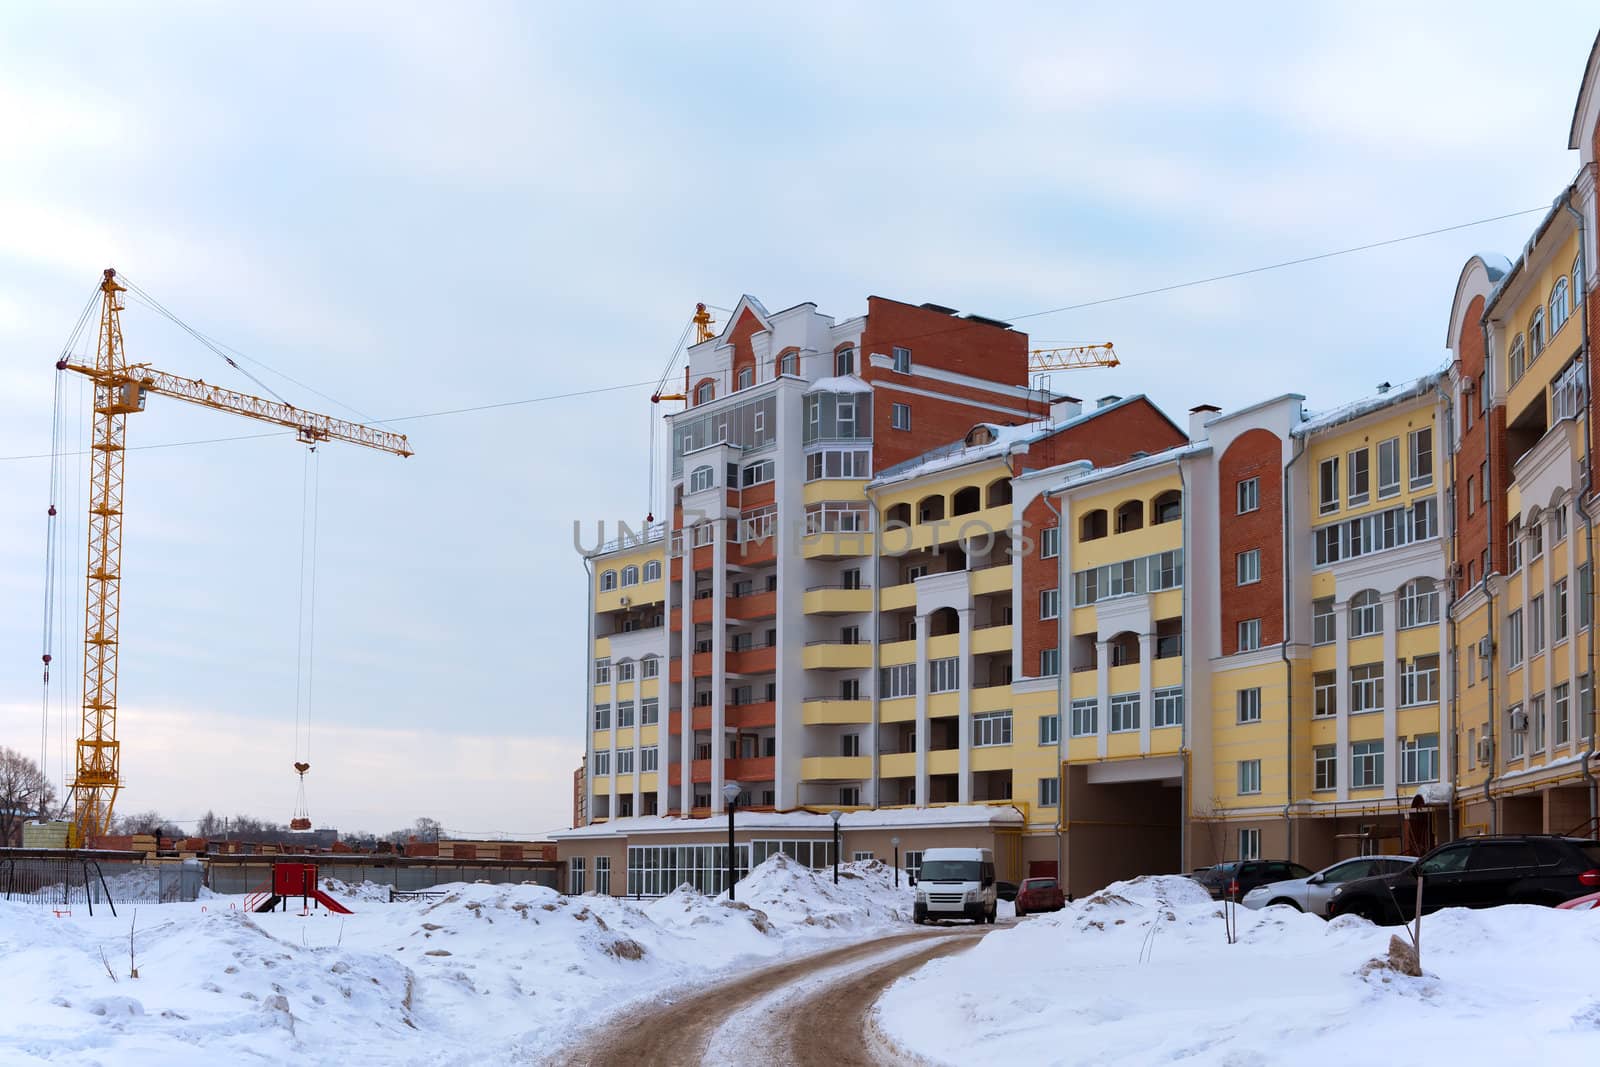 Building crane and building under construction against the white snow

